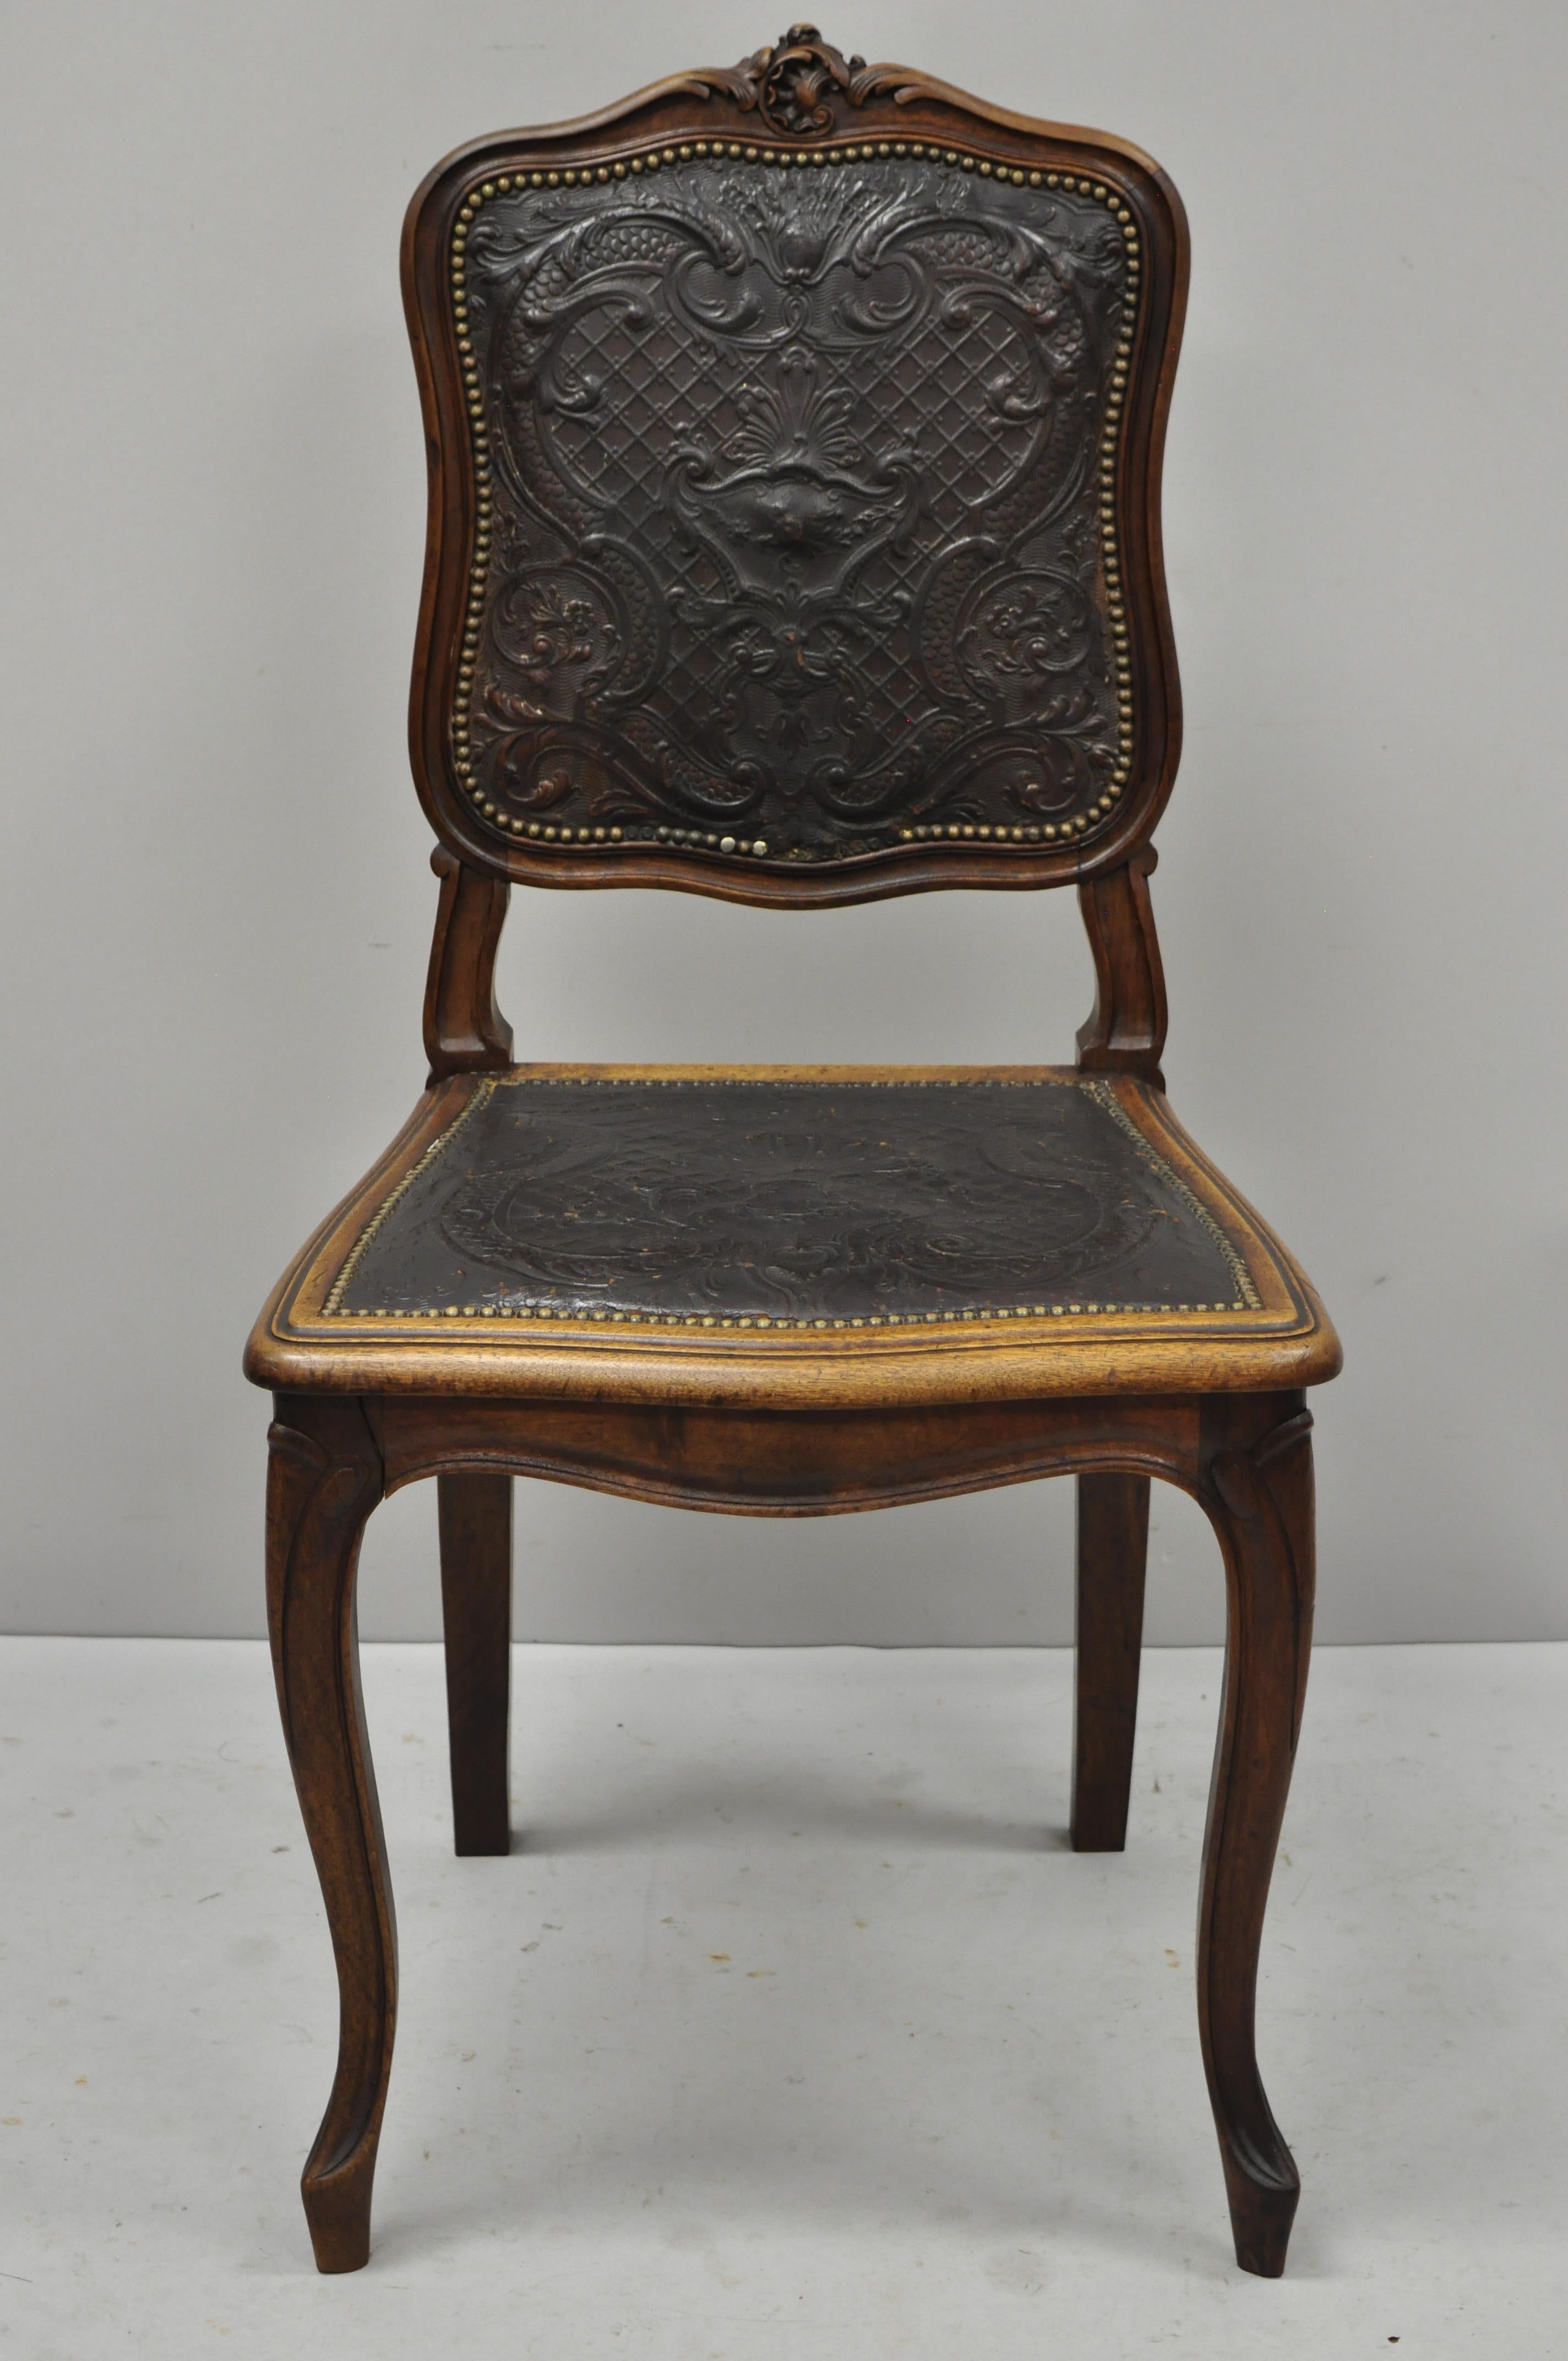 Antique French Louis XV style fancy brown embossed leather walnut side chair (C). Item features brown embossed leather back and seat, nailhead trim, solid wood frame, finely carved details, cabriole legs, very nice antique item, great style and form